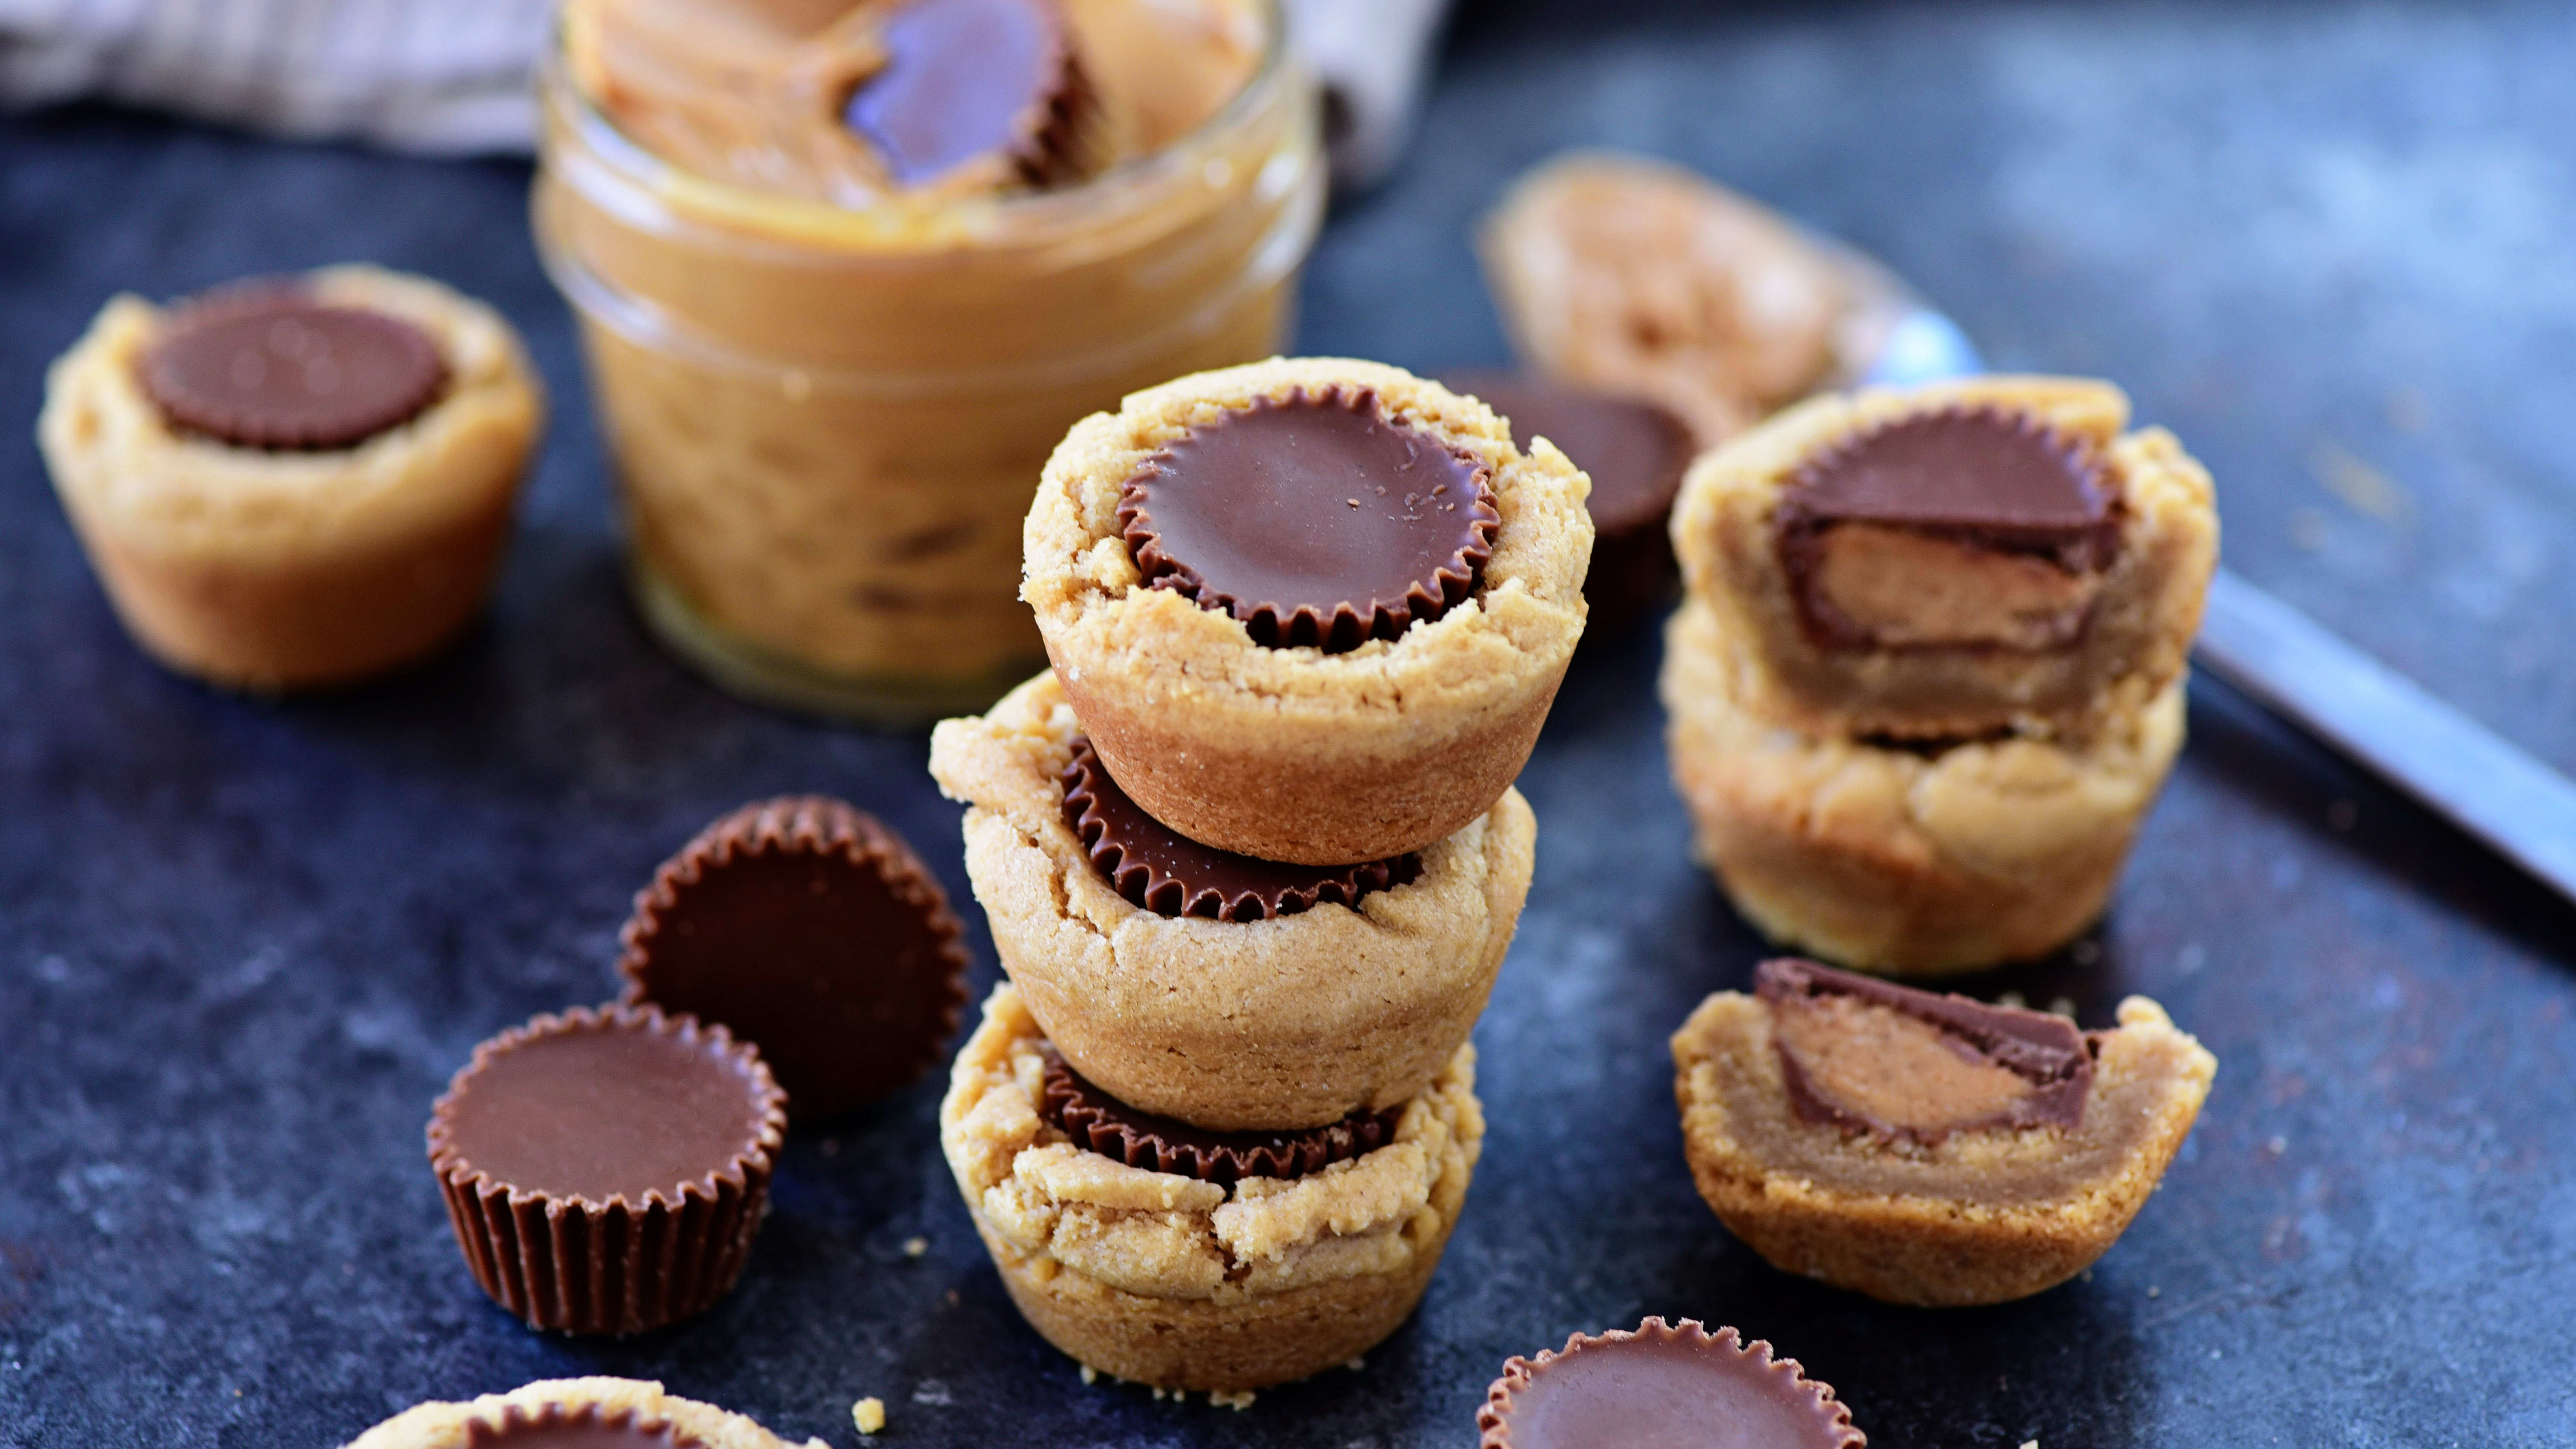 Peanut Butter Cookies – Baked In A Muffin Tin! - Chocolate Covered Katie